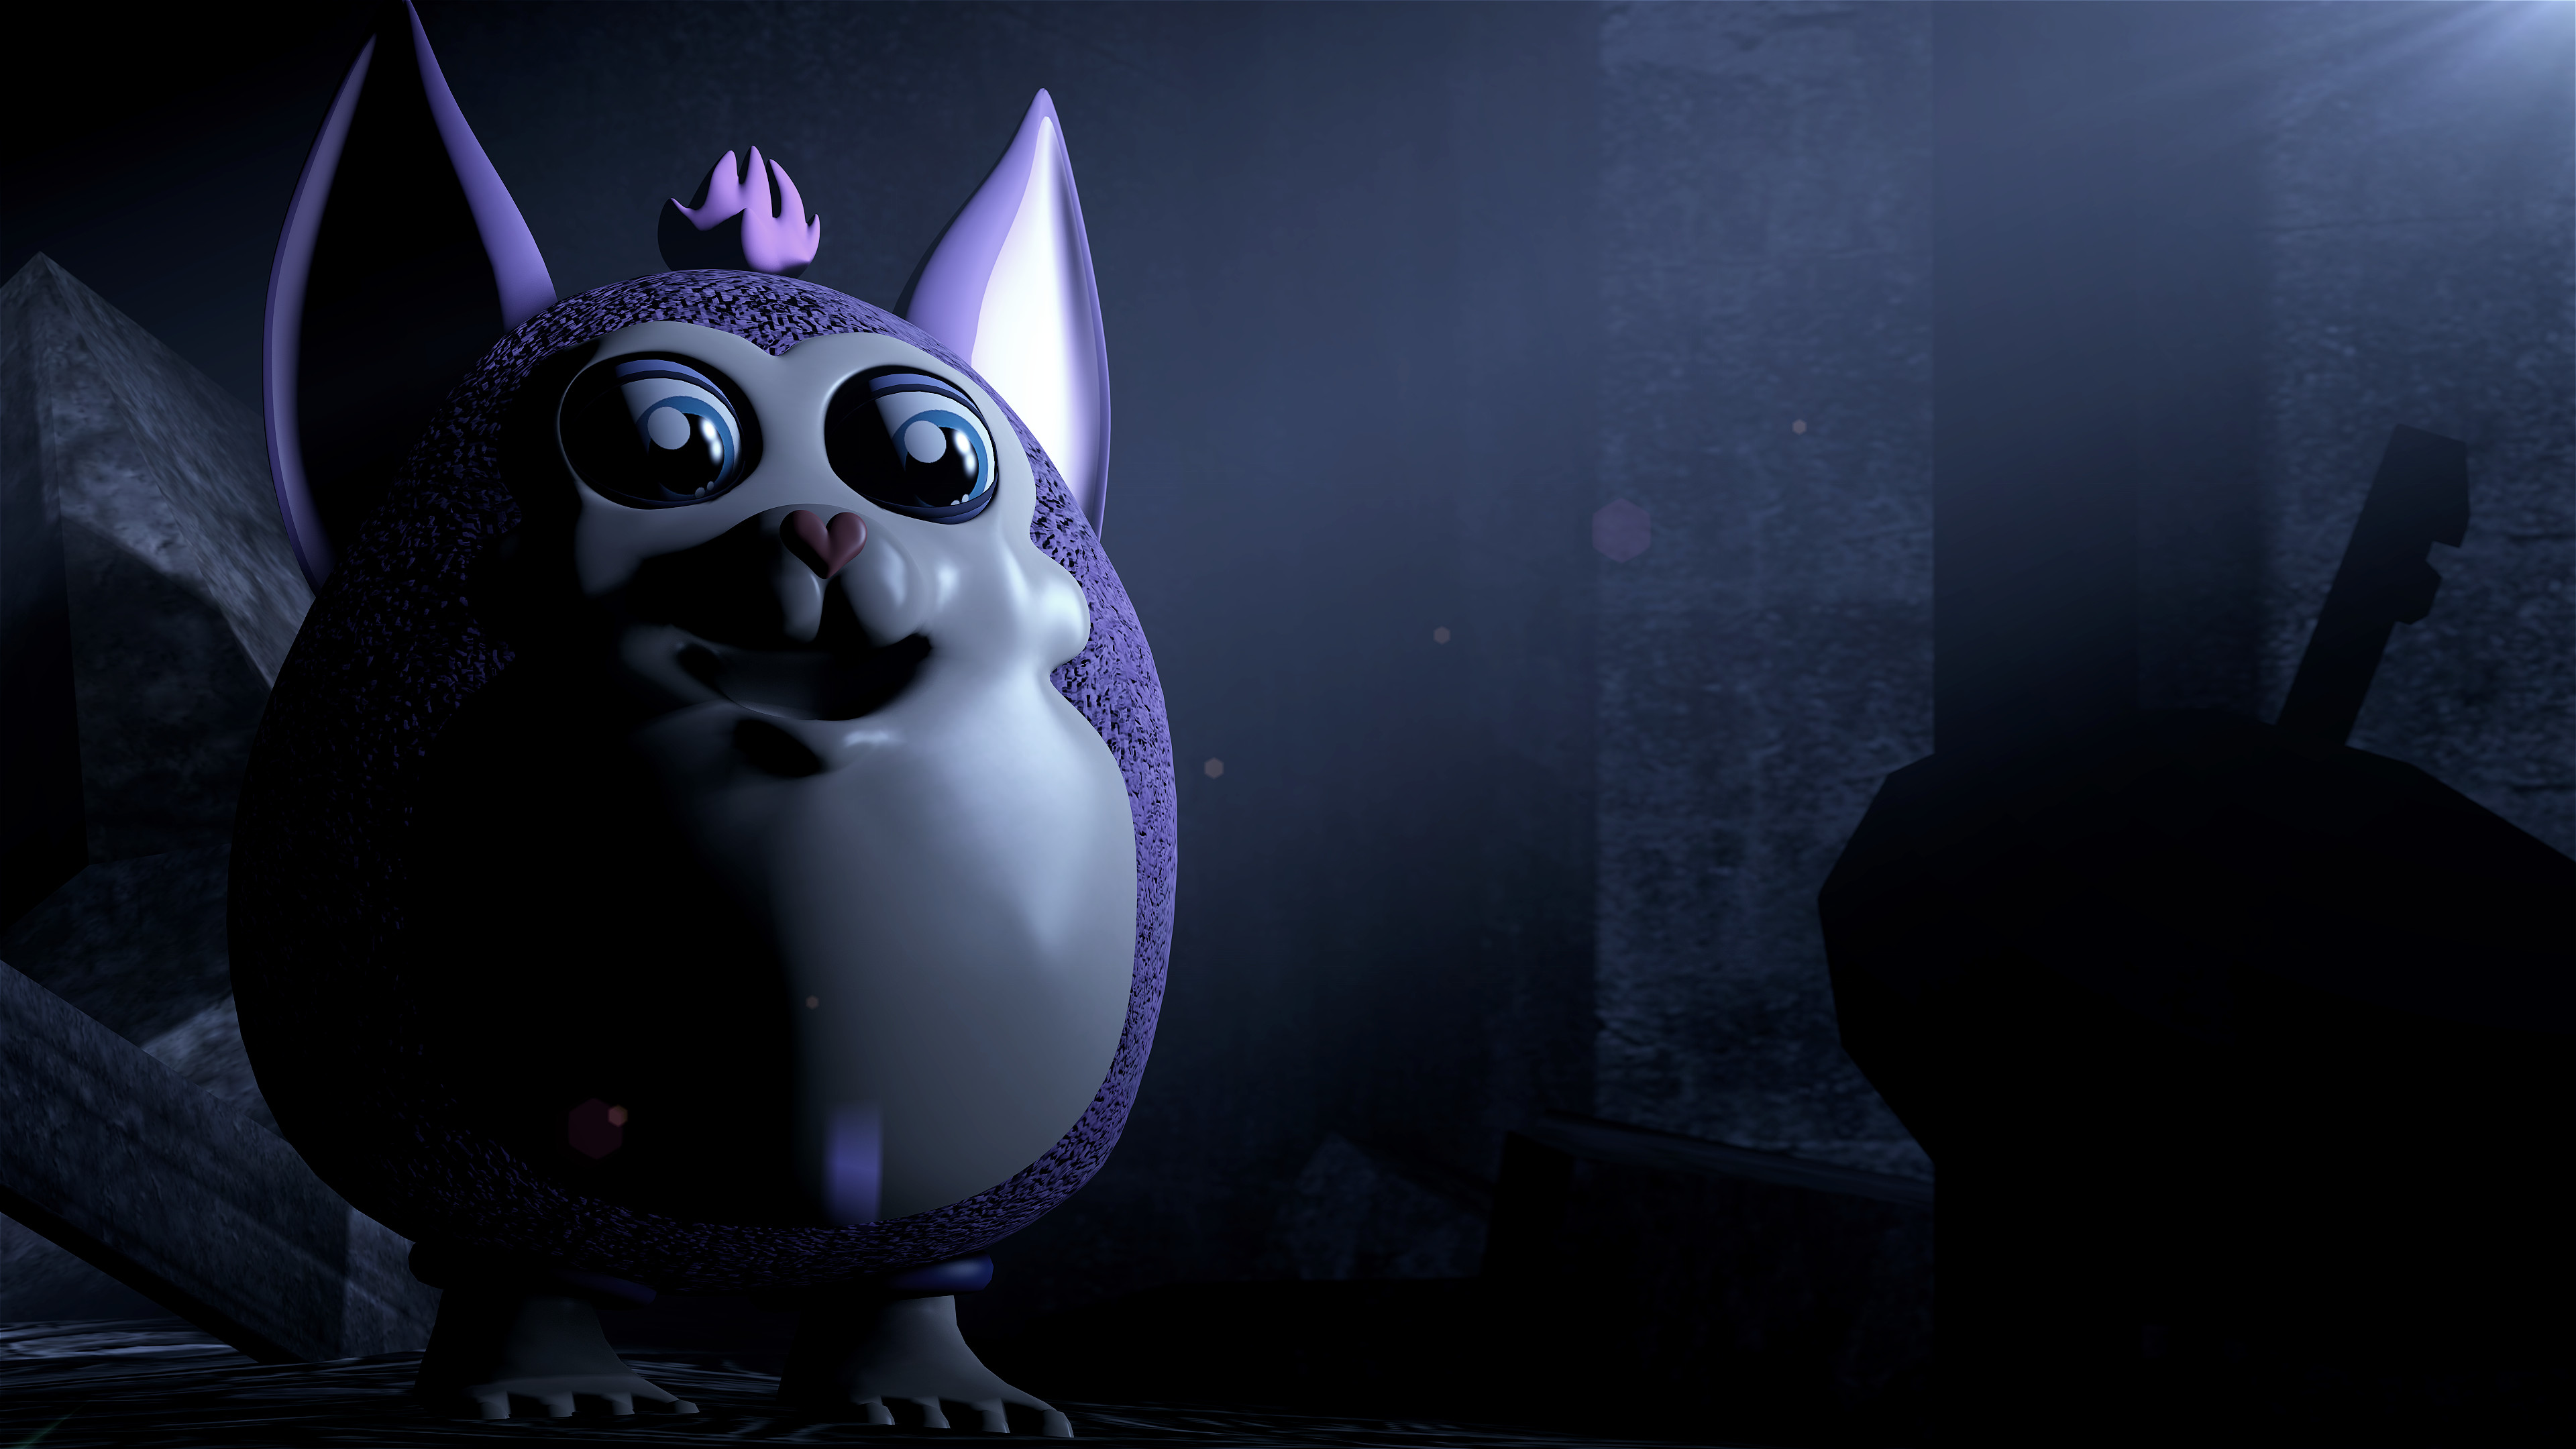 3840x2160 CosmicTangent92 29 5 My Name's Tattletail by JustJolly